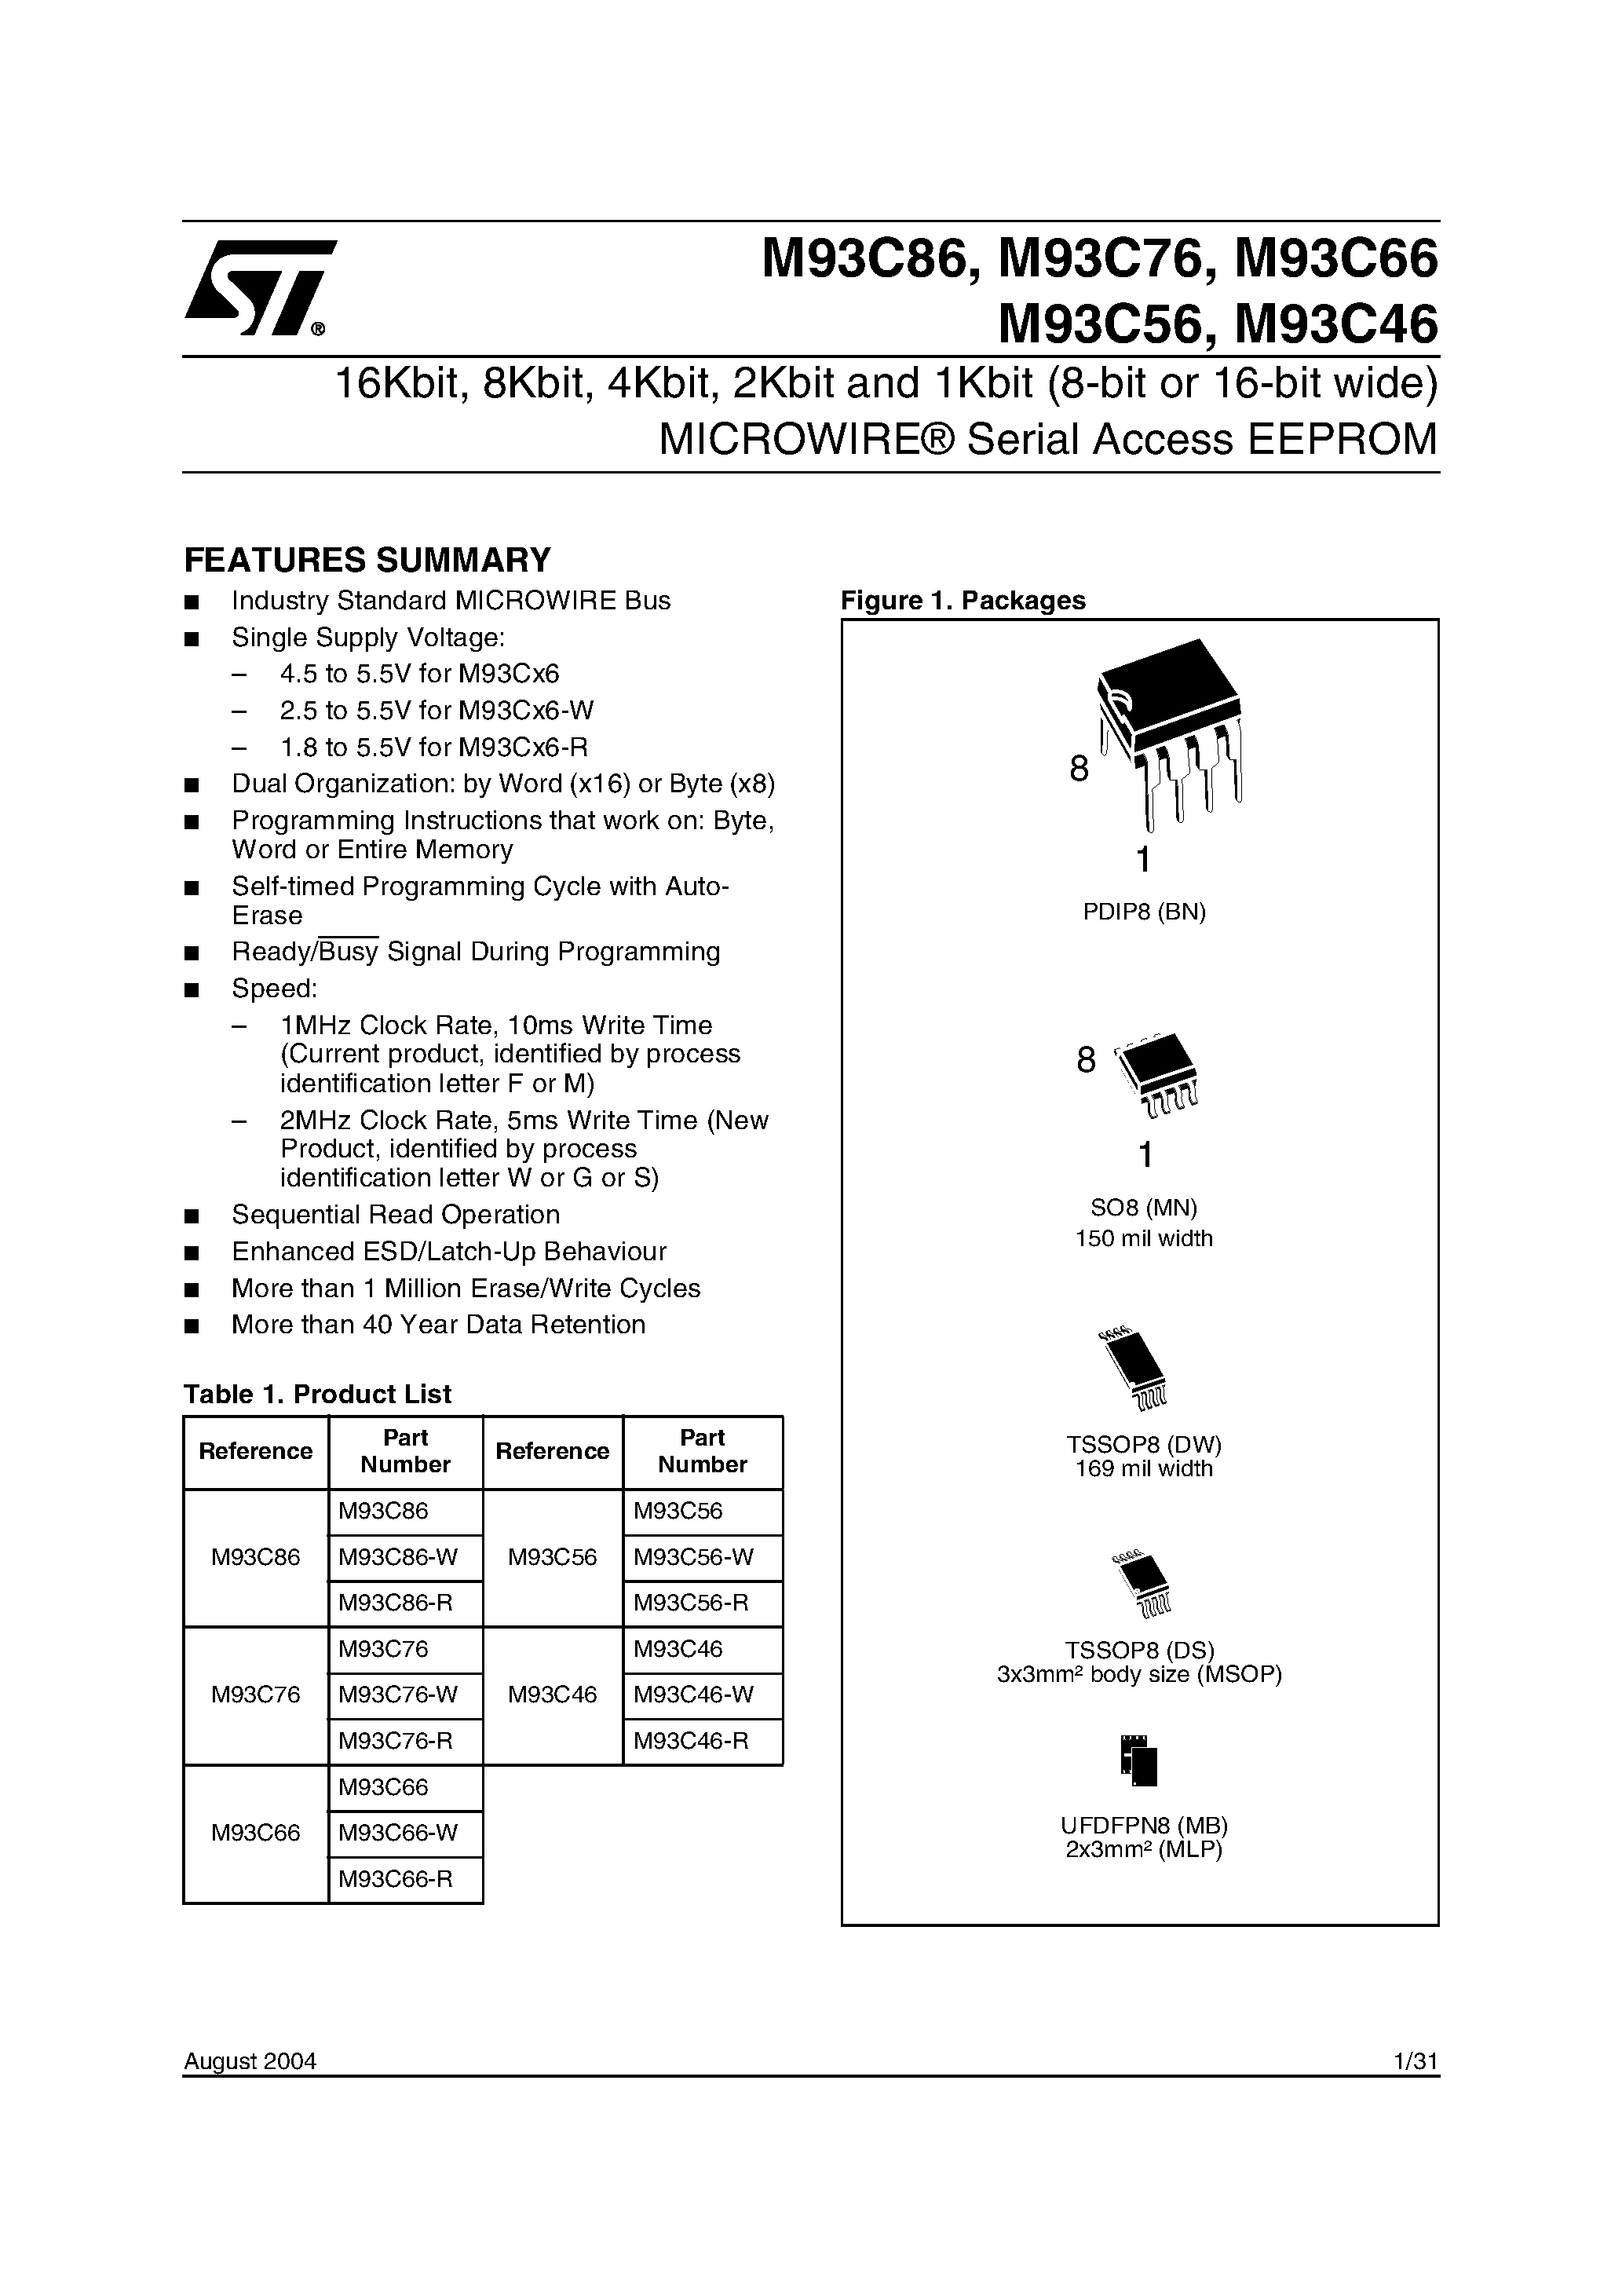 Datasheet M93C66 - 16Kbit / 8Kbit / 4Kbit / 2Kbit / 1Kbit and 256bit 8-bit or 16-bit wide page 1